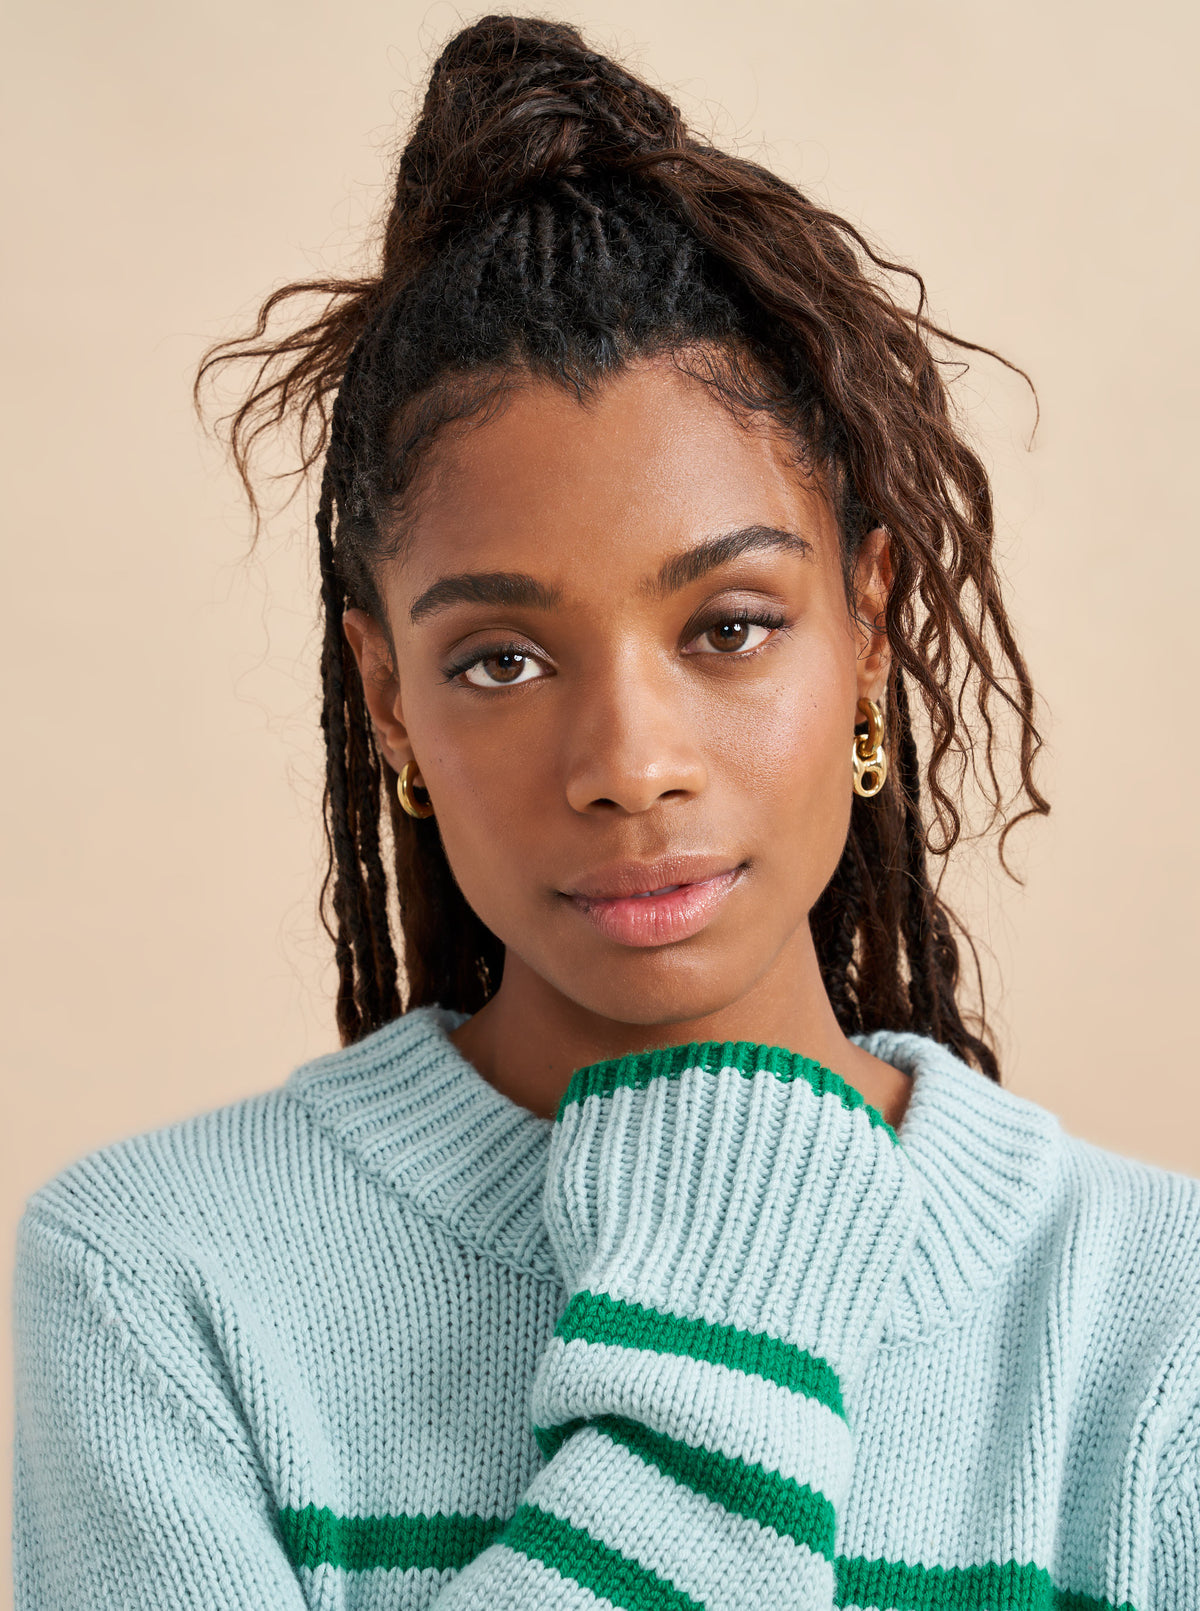 Get on board with our pale blue with green stripe, 7-ply wool-cashmere sweater, shrunken and slightly cropped, but as always, comfort and style not mutually exclusive.